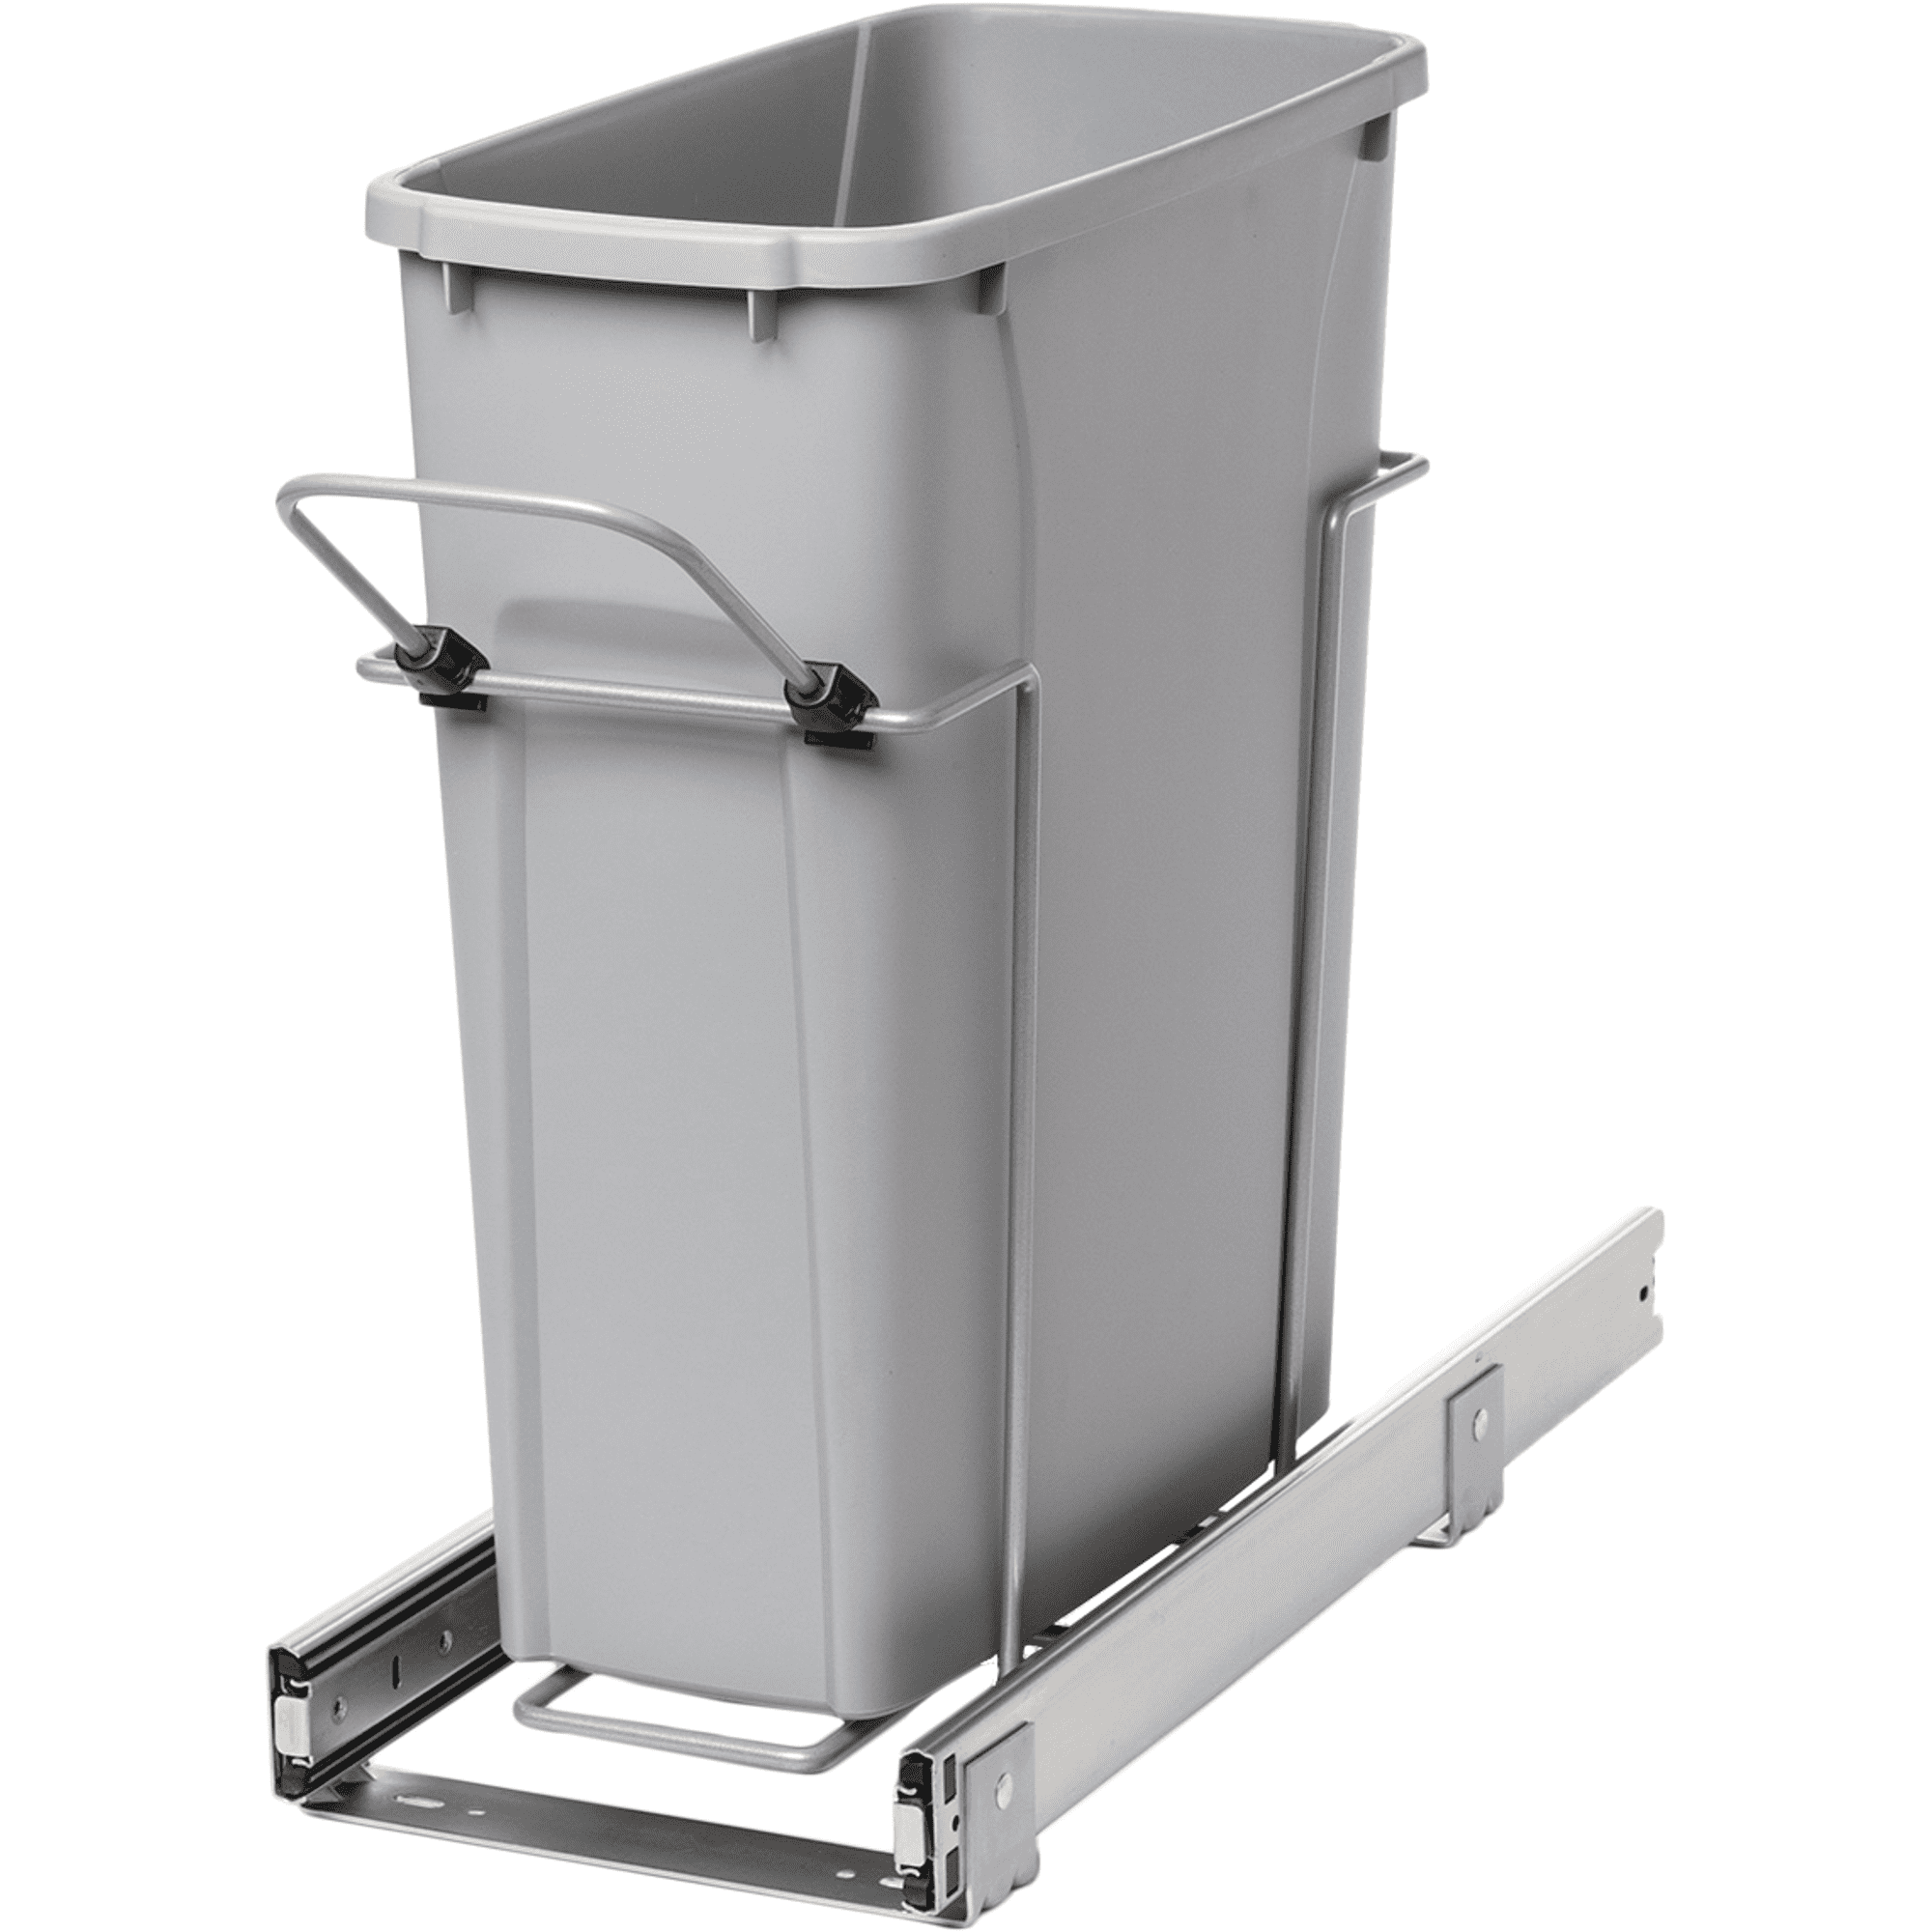 Single Pullout Trash Organizer Full Extension Soft Close System with Bin 36 Qt